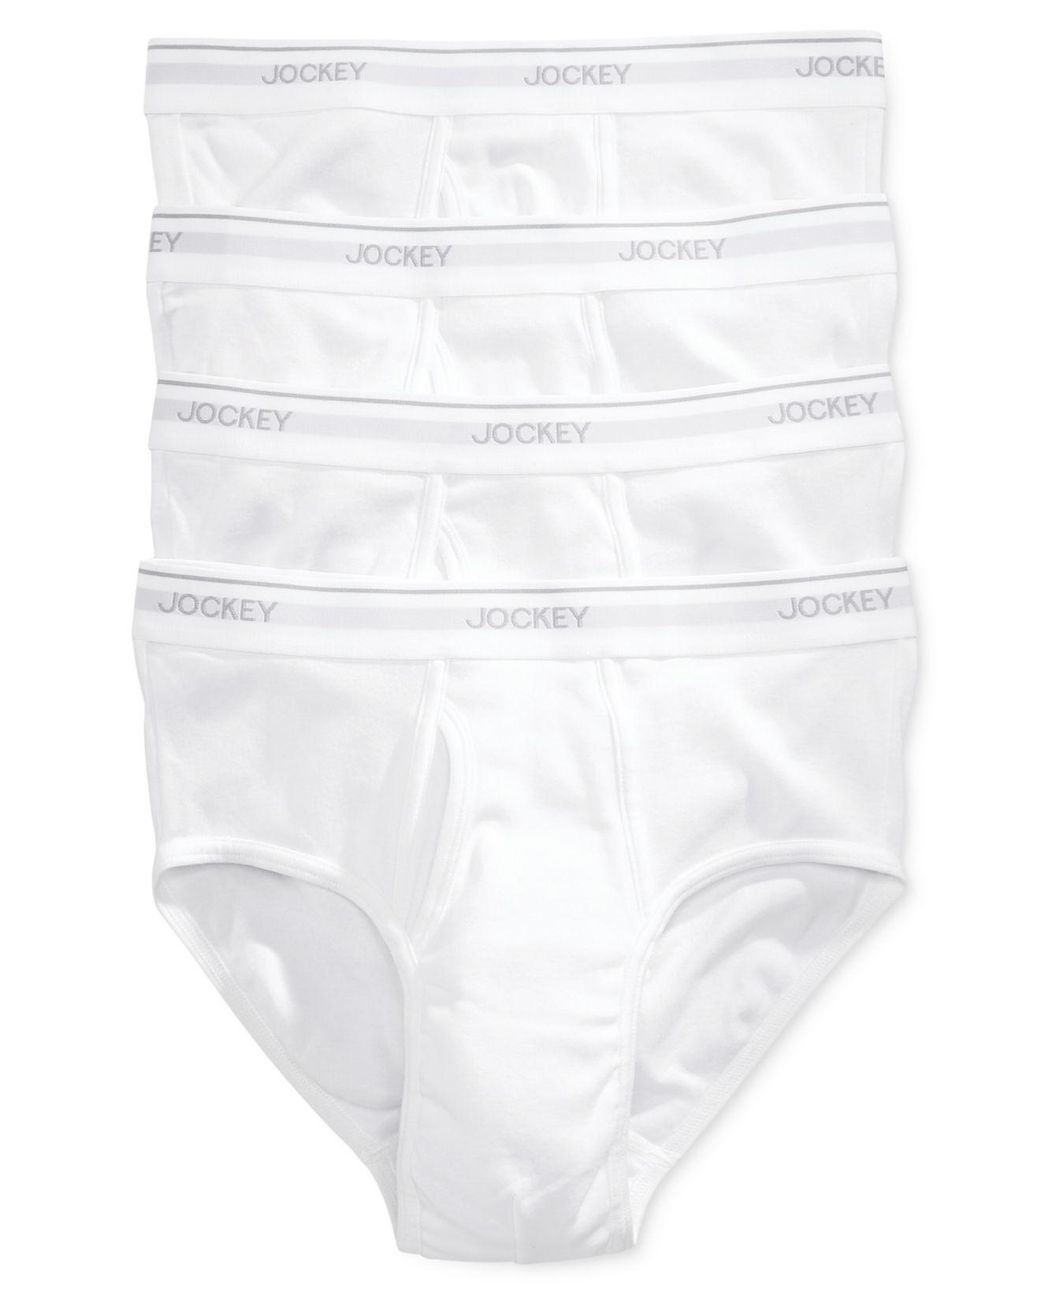 Jockey 4 Pack Essential Fit Staycool + Cotton Briefs in White for Men